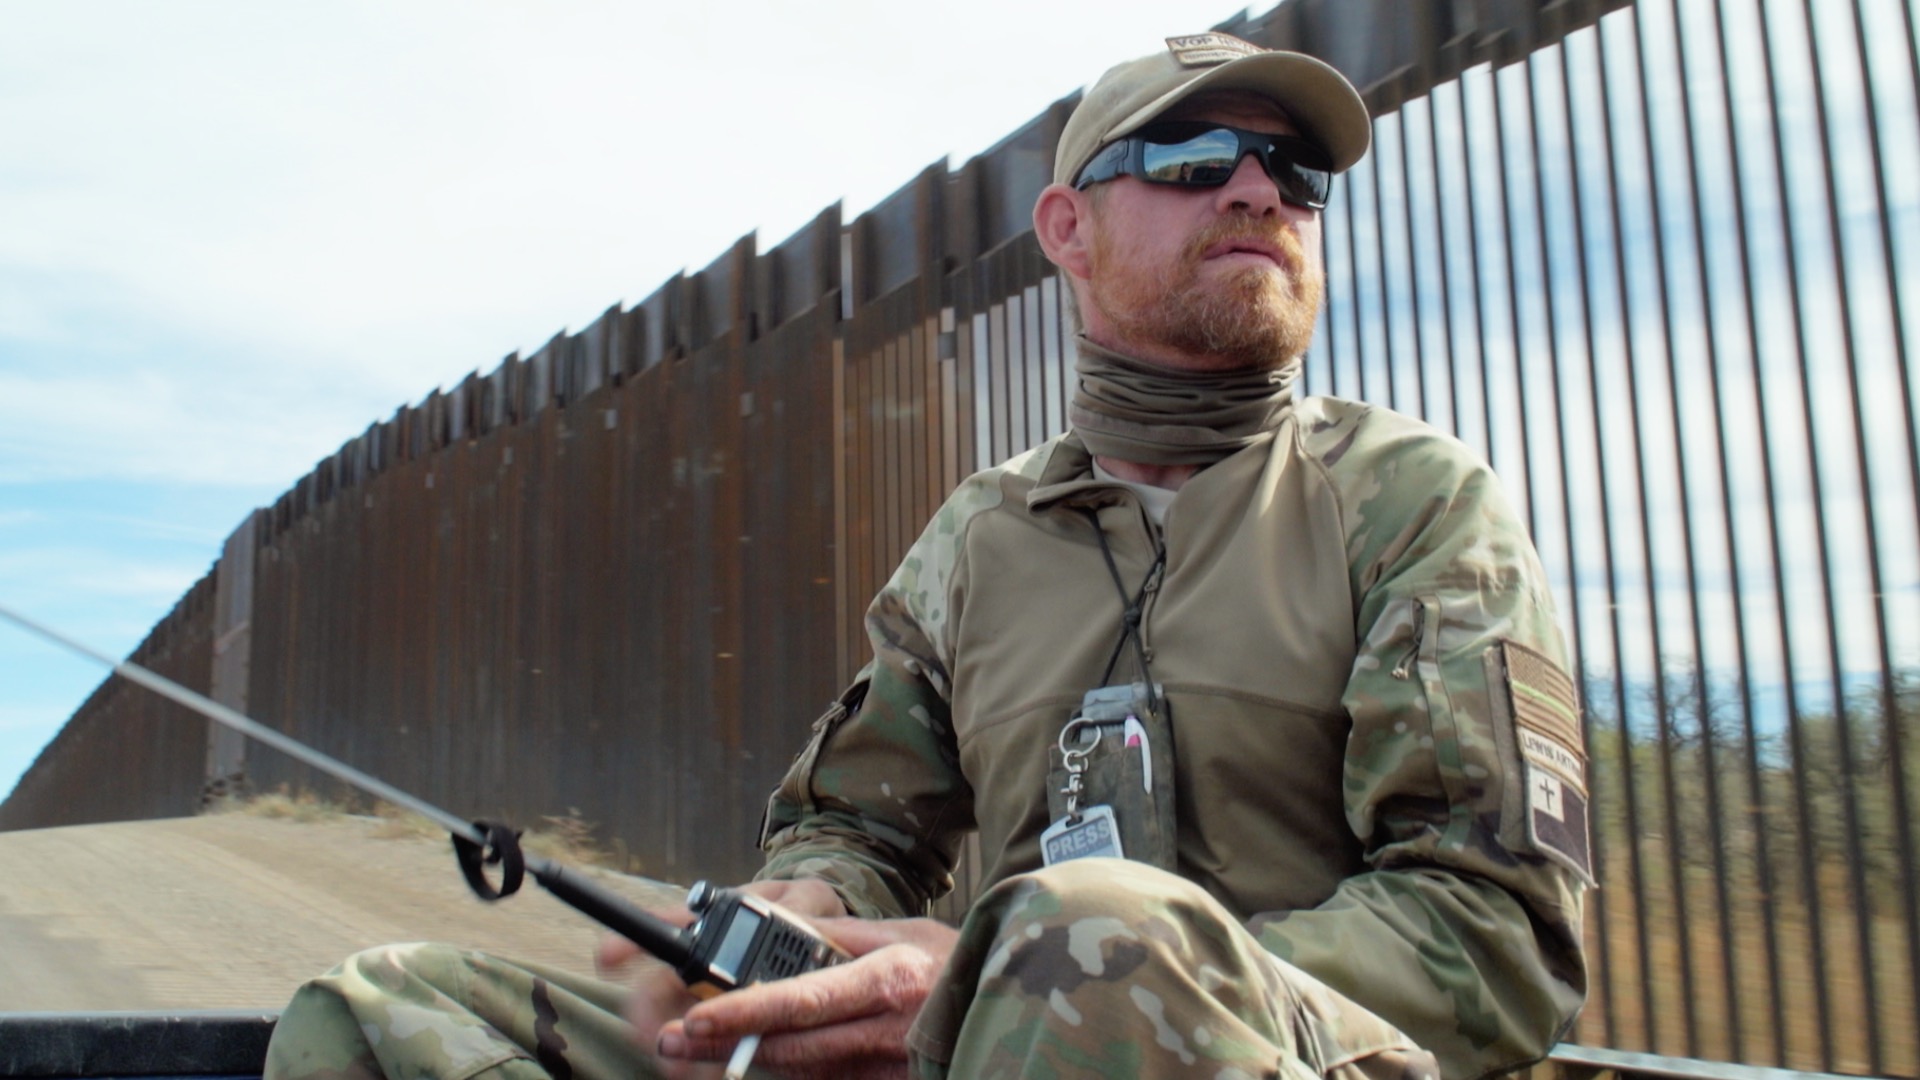 An armed vigilante sits on the back of a truck patrolling the U.S–Mexico border. You can see the wall dividing the countries behind him.